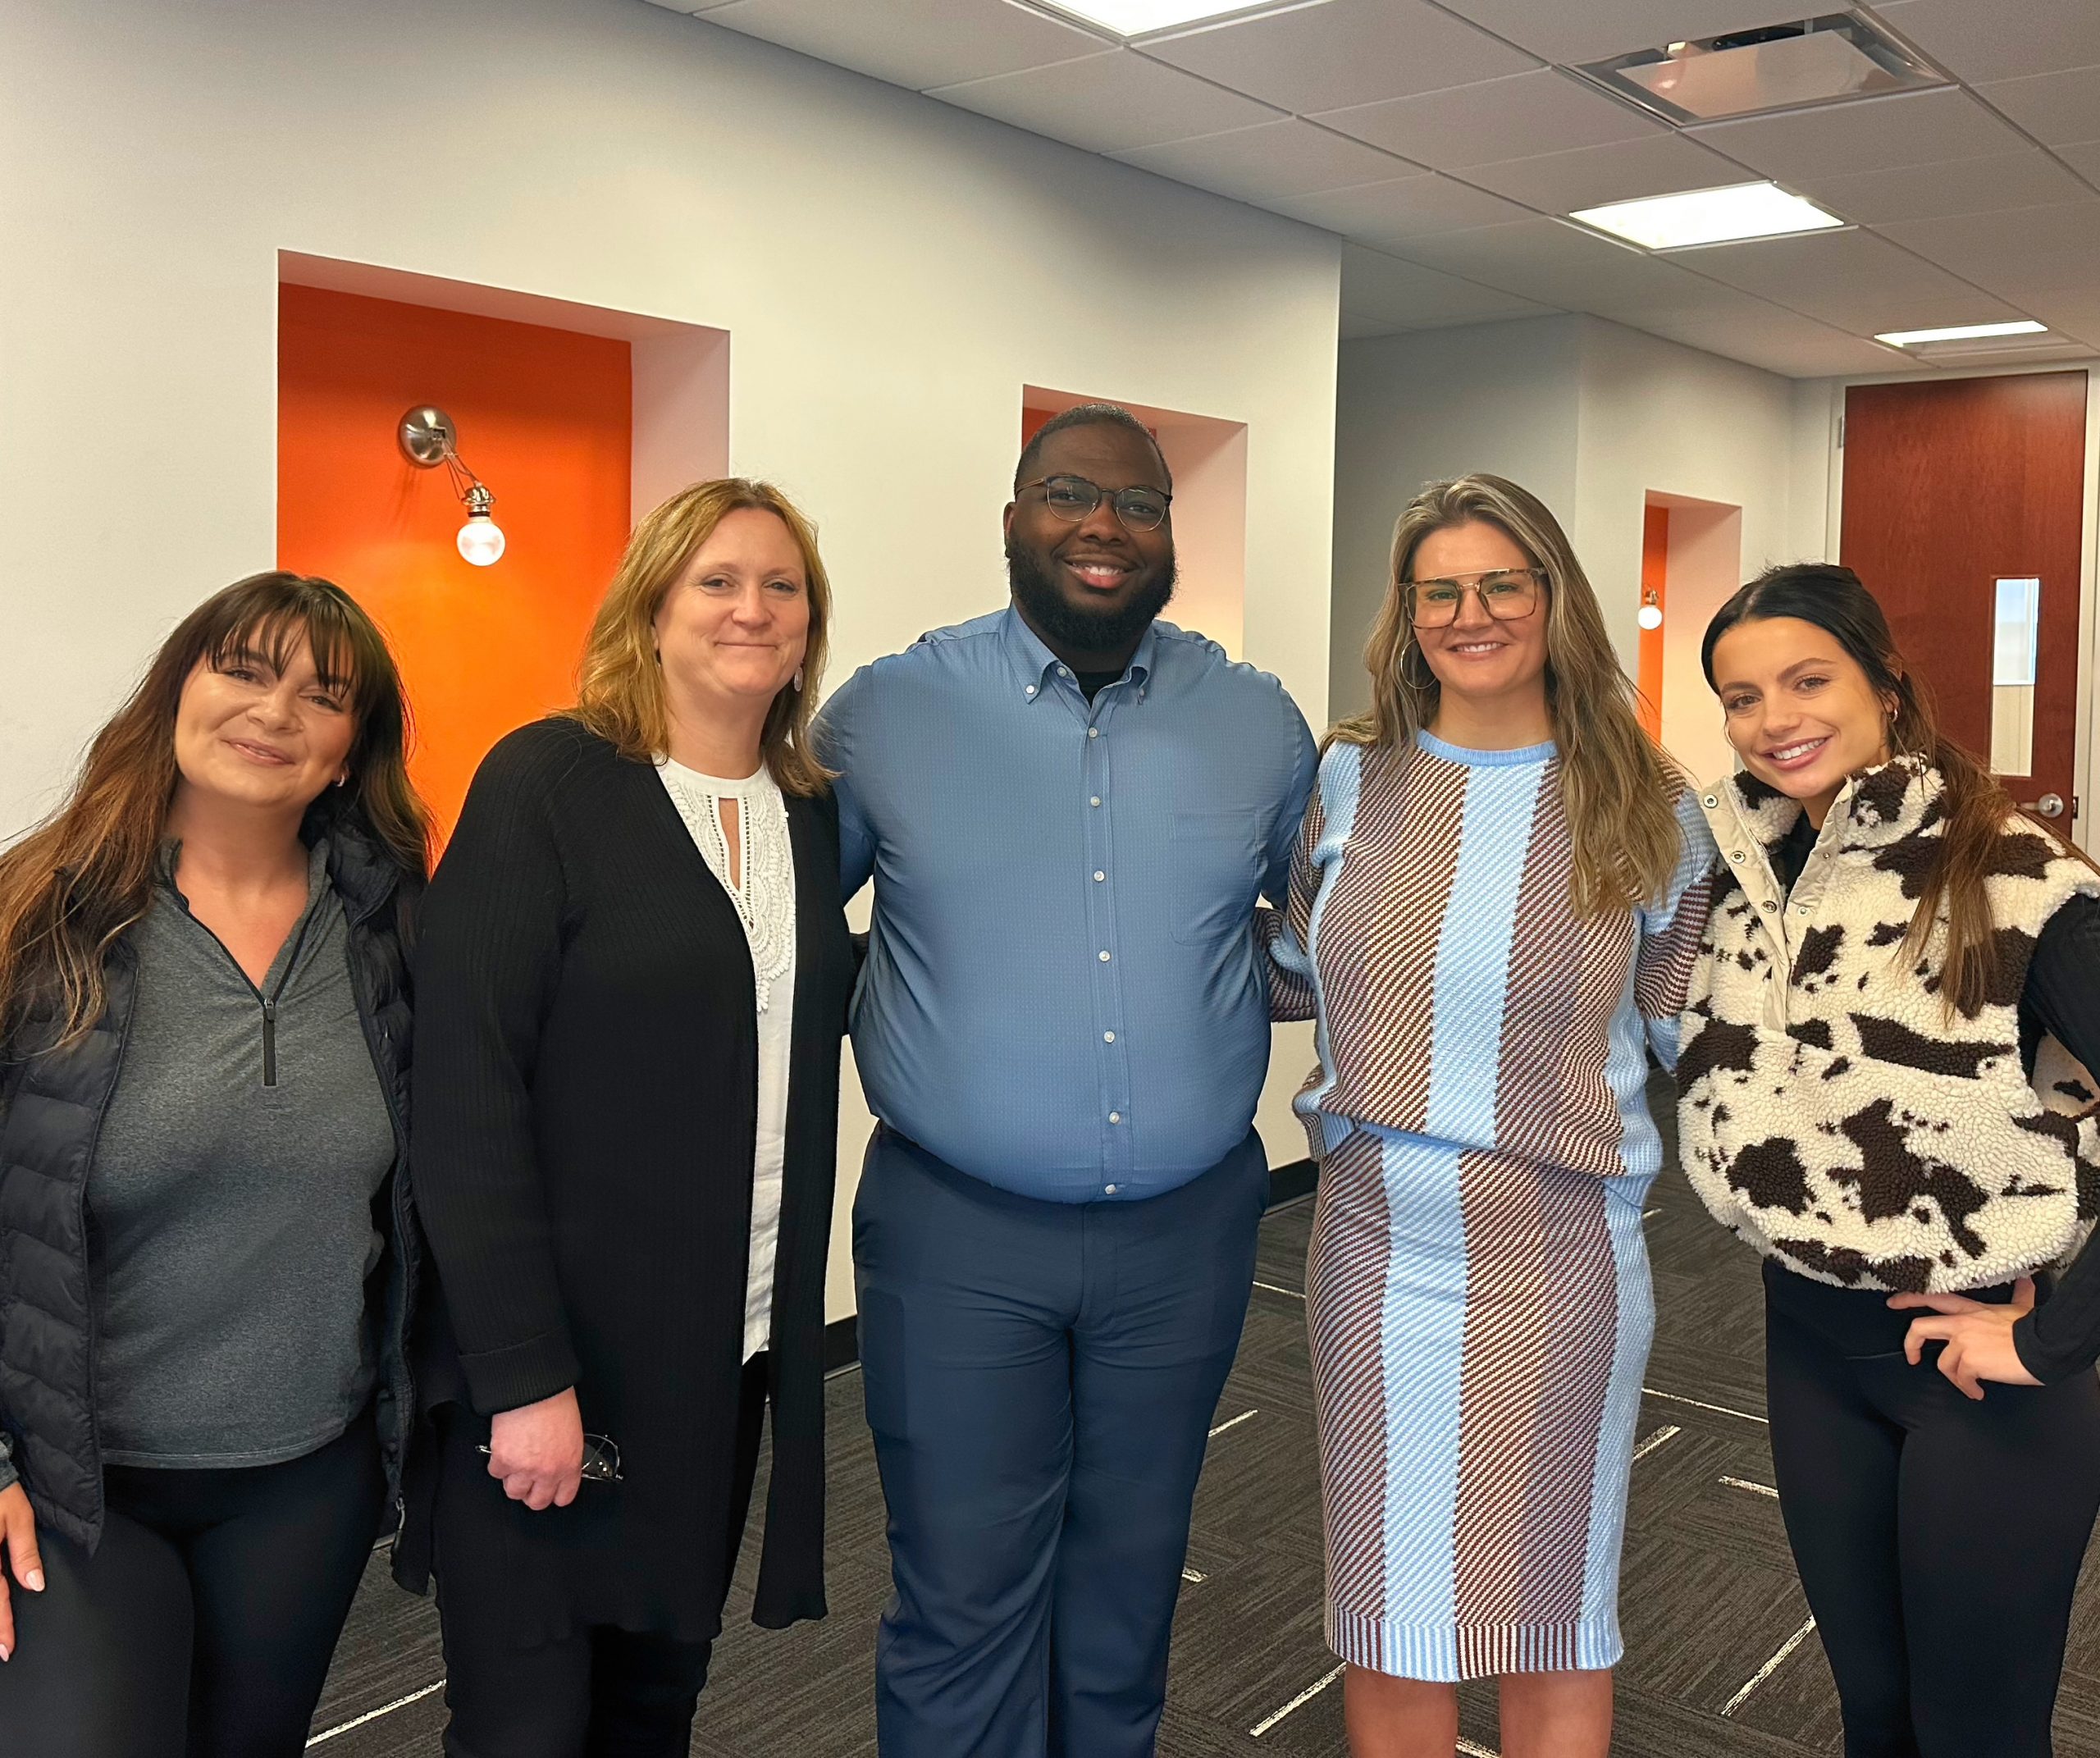 Dell Nared Jr. (Center) Meeting Candace and our HR team